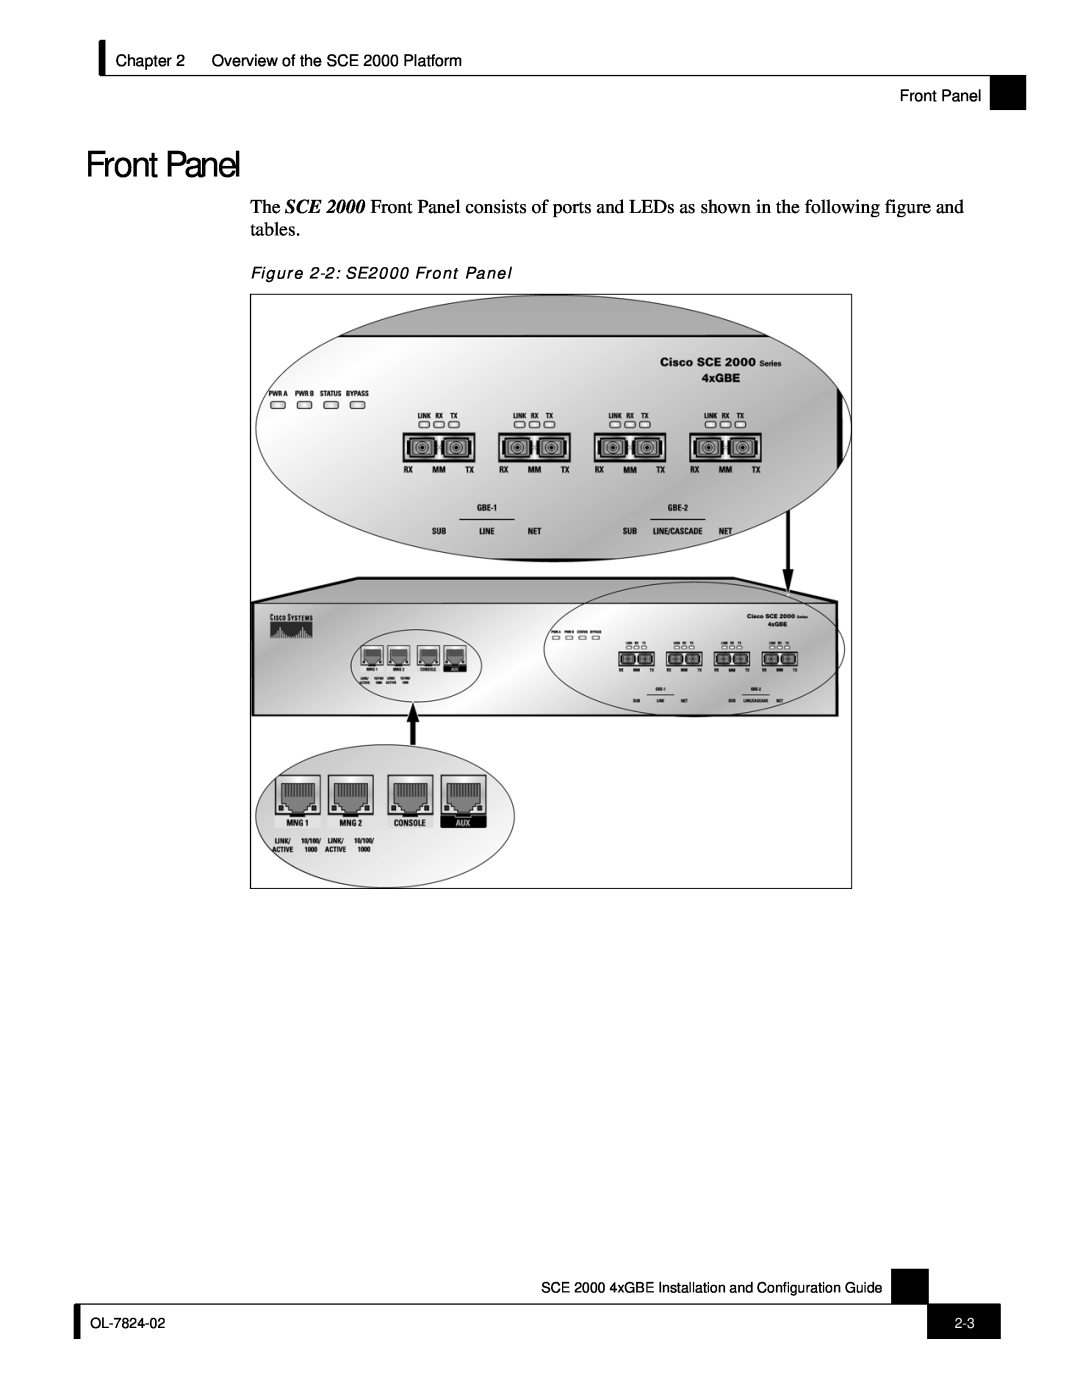 Cisco Systems SCE 2000 4xGBE manual Overview of the SCE 2000 Platform Front Panel, 2 SE2000 Front Panel, OL-7824-02 